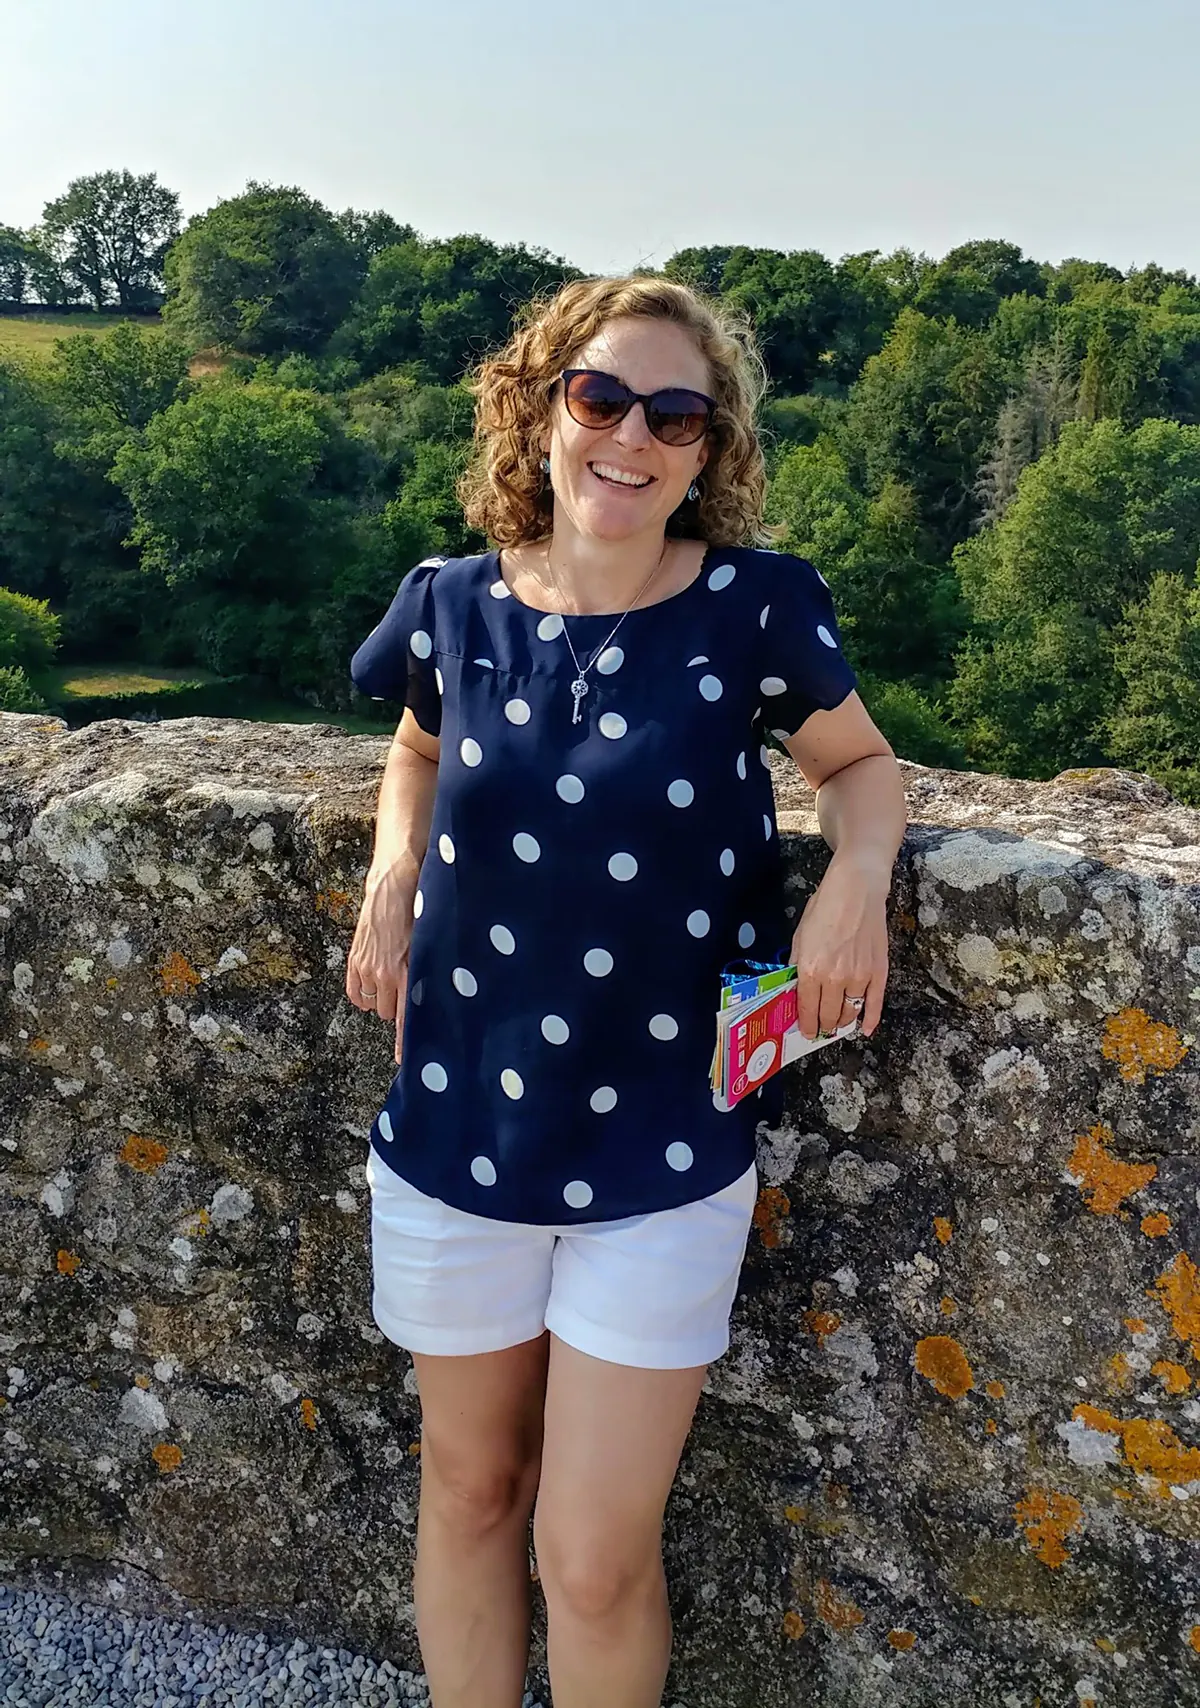 Invivyd employee Kim Chambert on vacation, standing against an old, lichen-covered wall